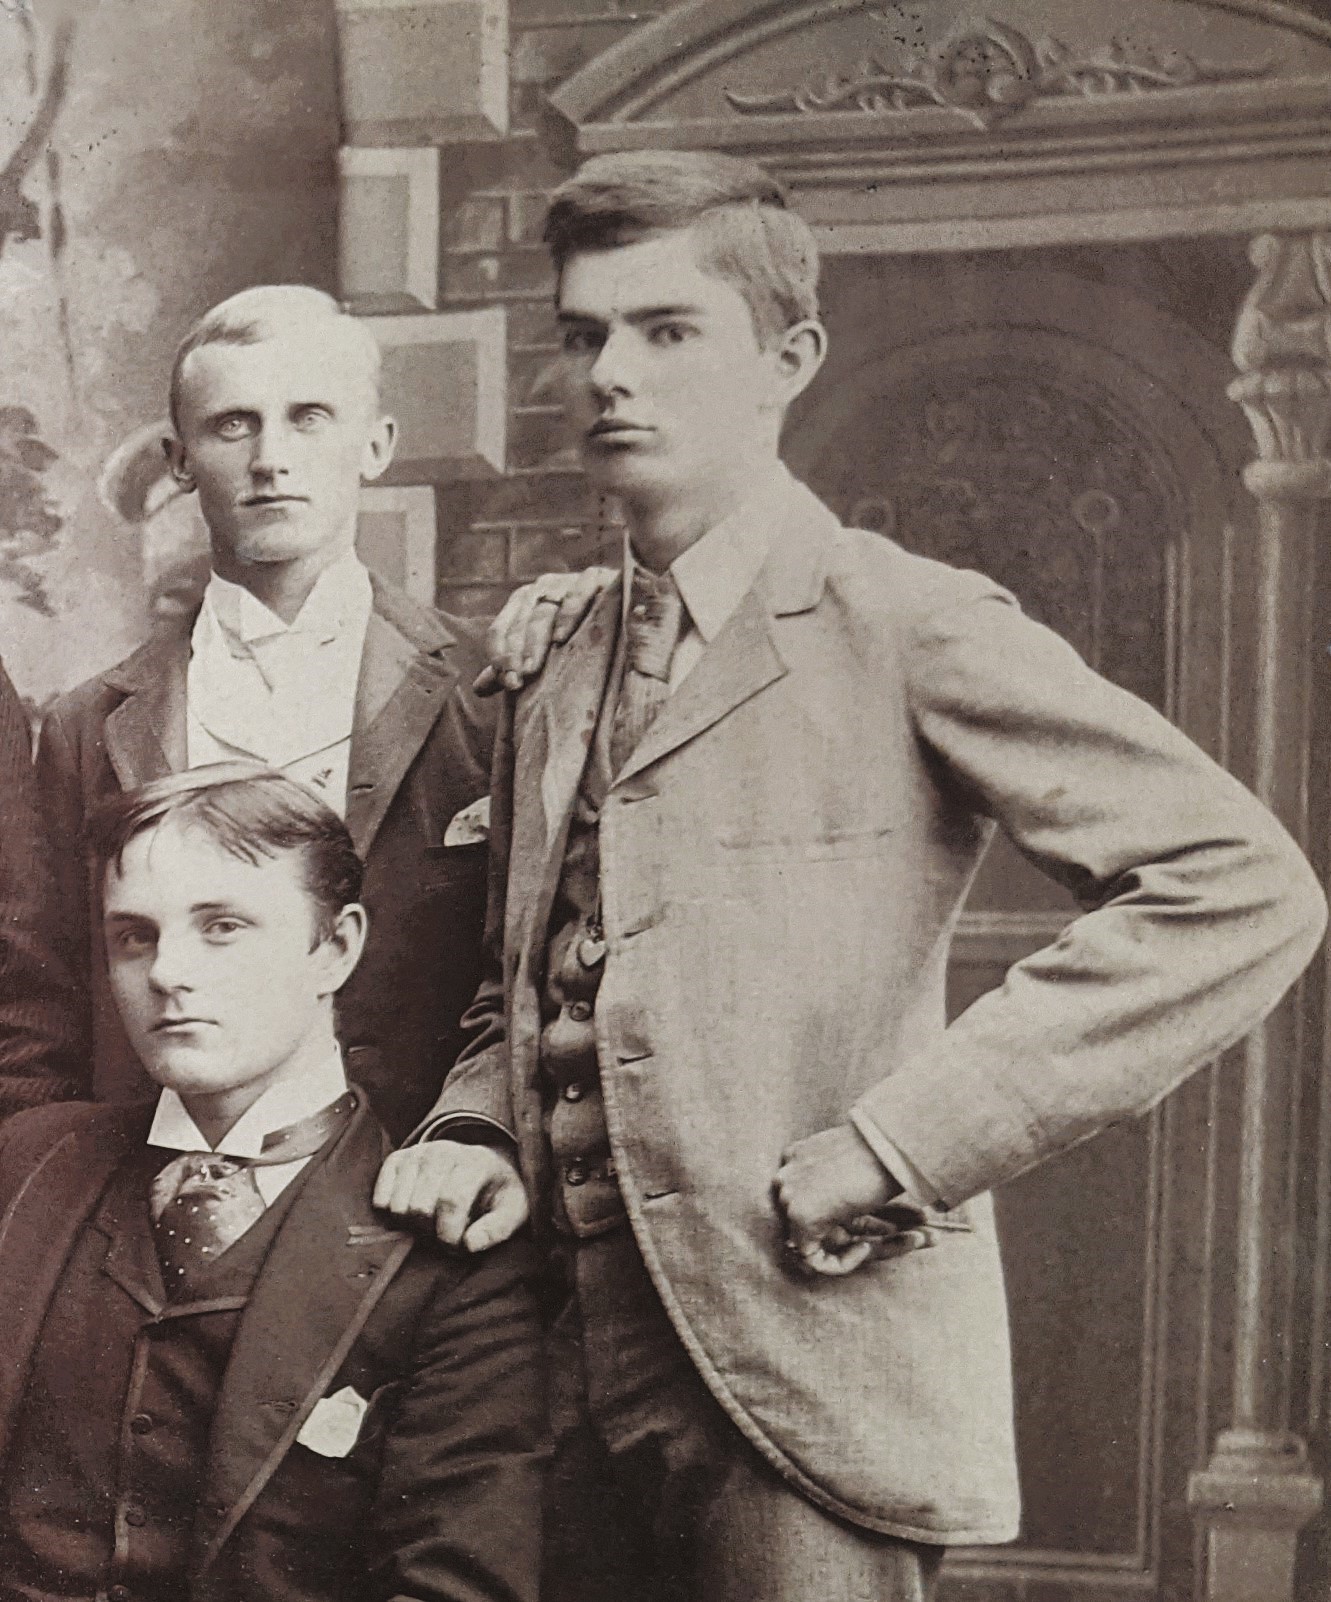 Kitty's father, Edwin O'Brien, is pictured at right with UVA college baseball teammates.